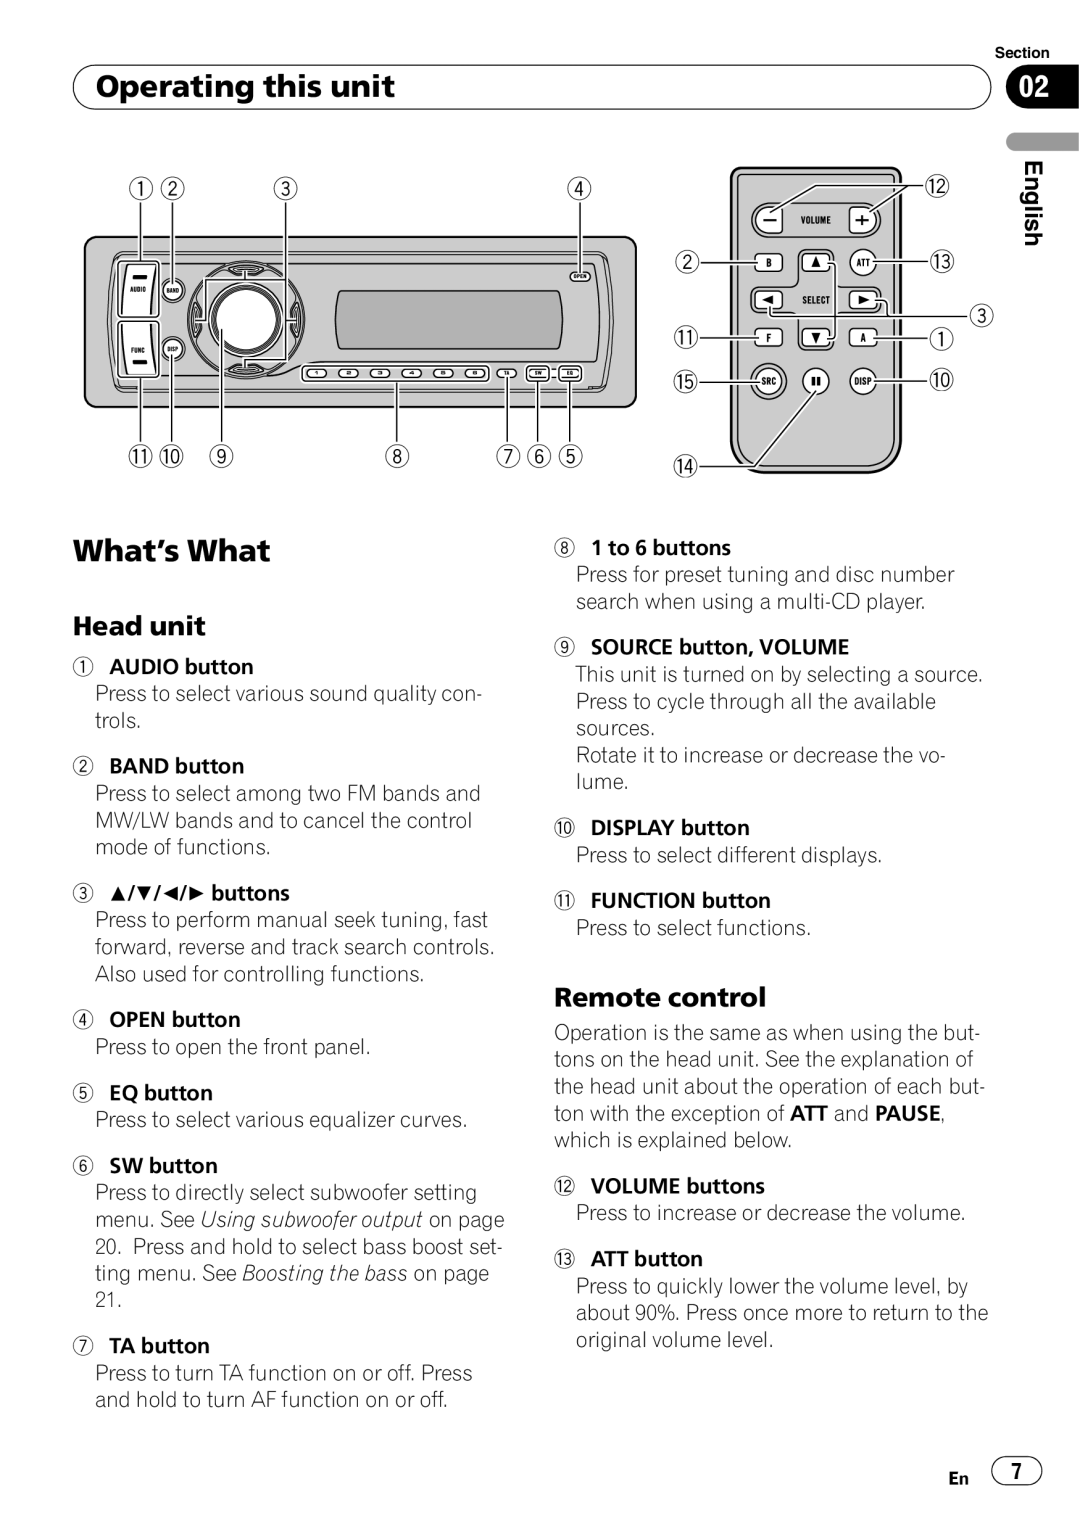 Pioneer DEH-P4900IB operation manual Operating this unit, What’s What, Head unit, Remote control 